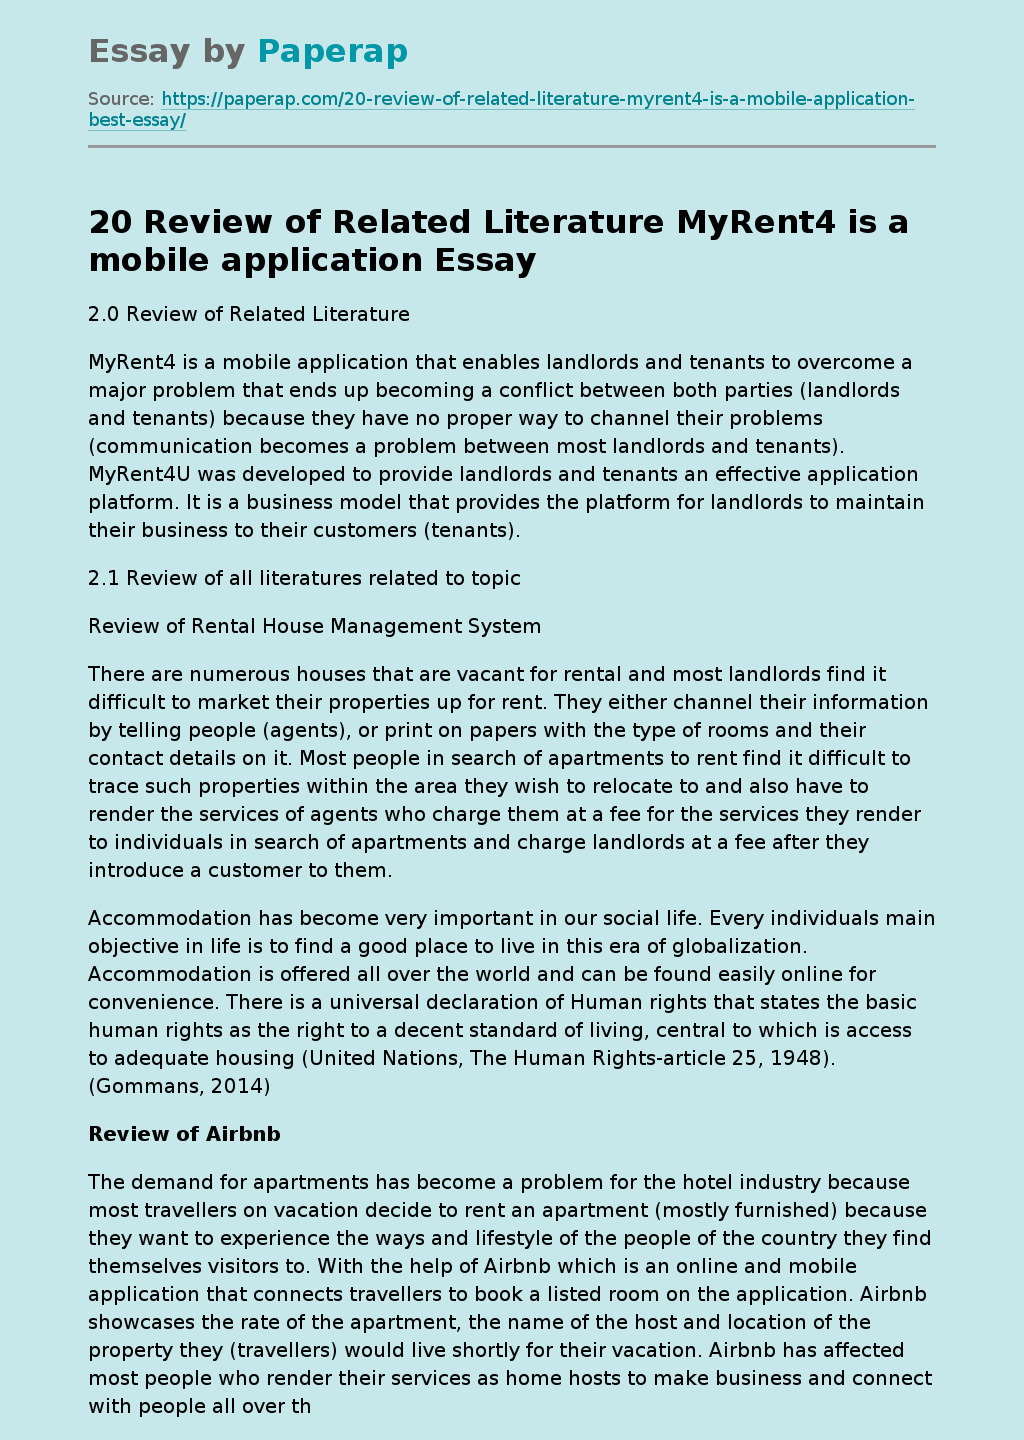 20 Review of Related Literature MyRent4 is a mobile application